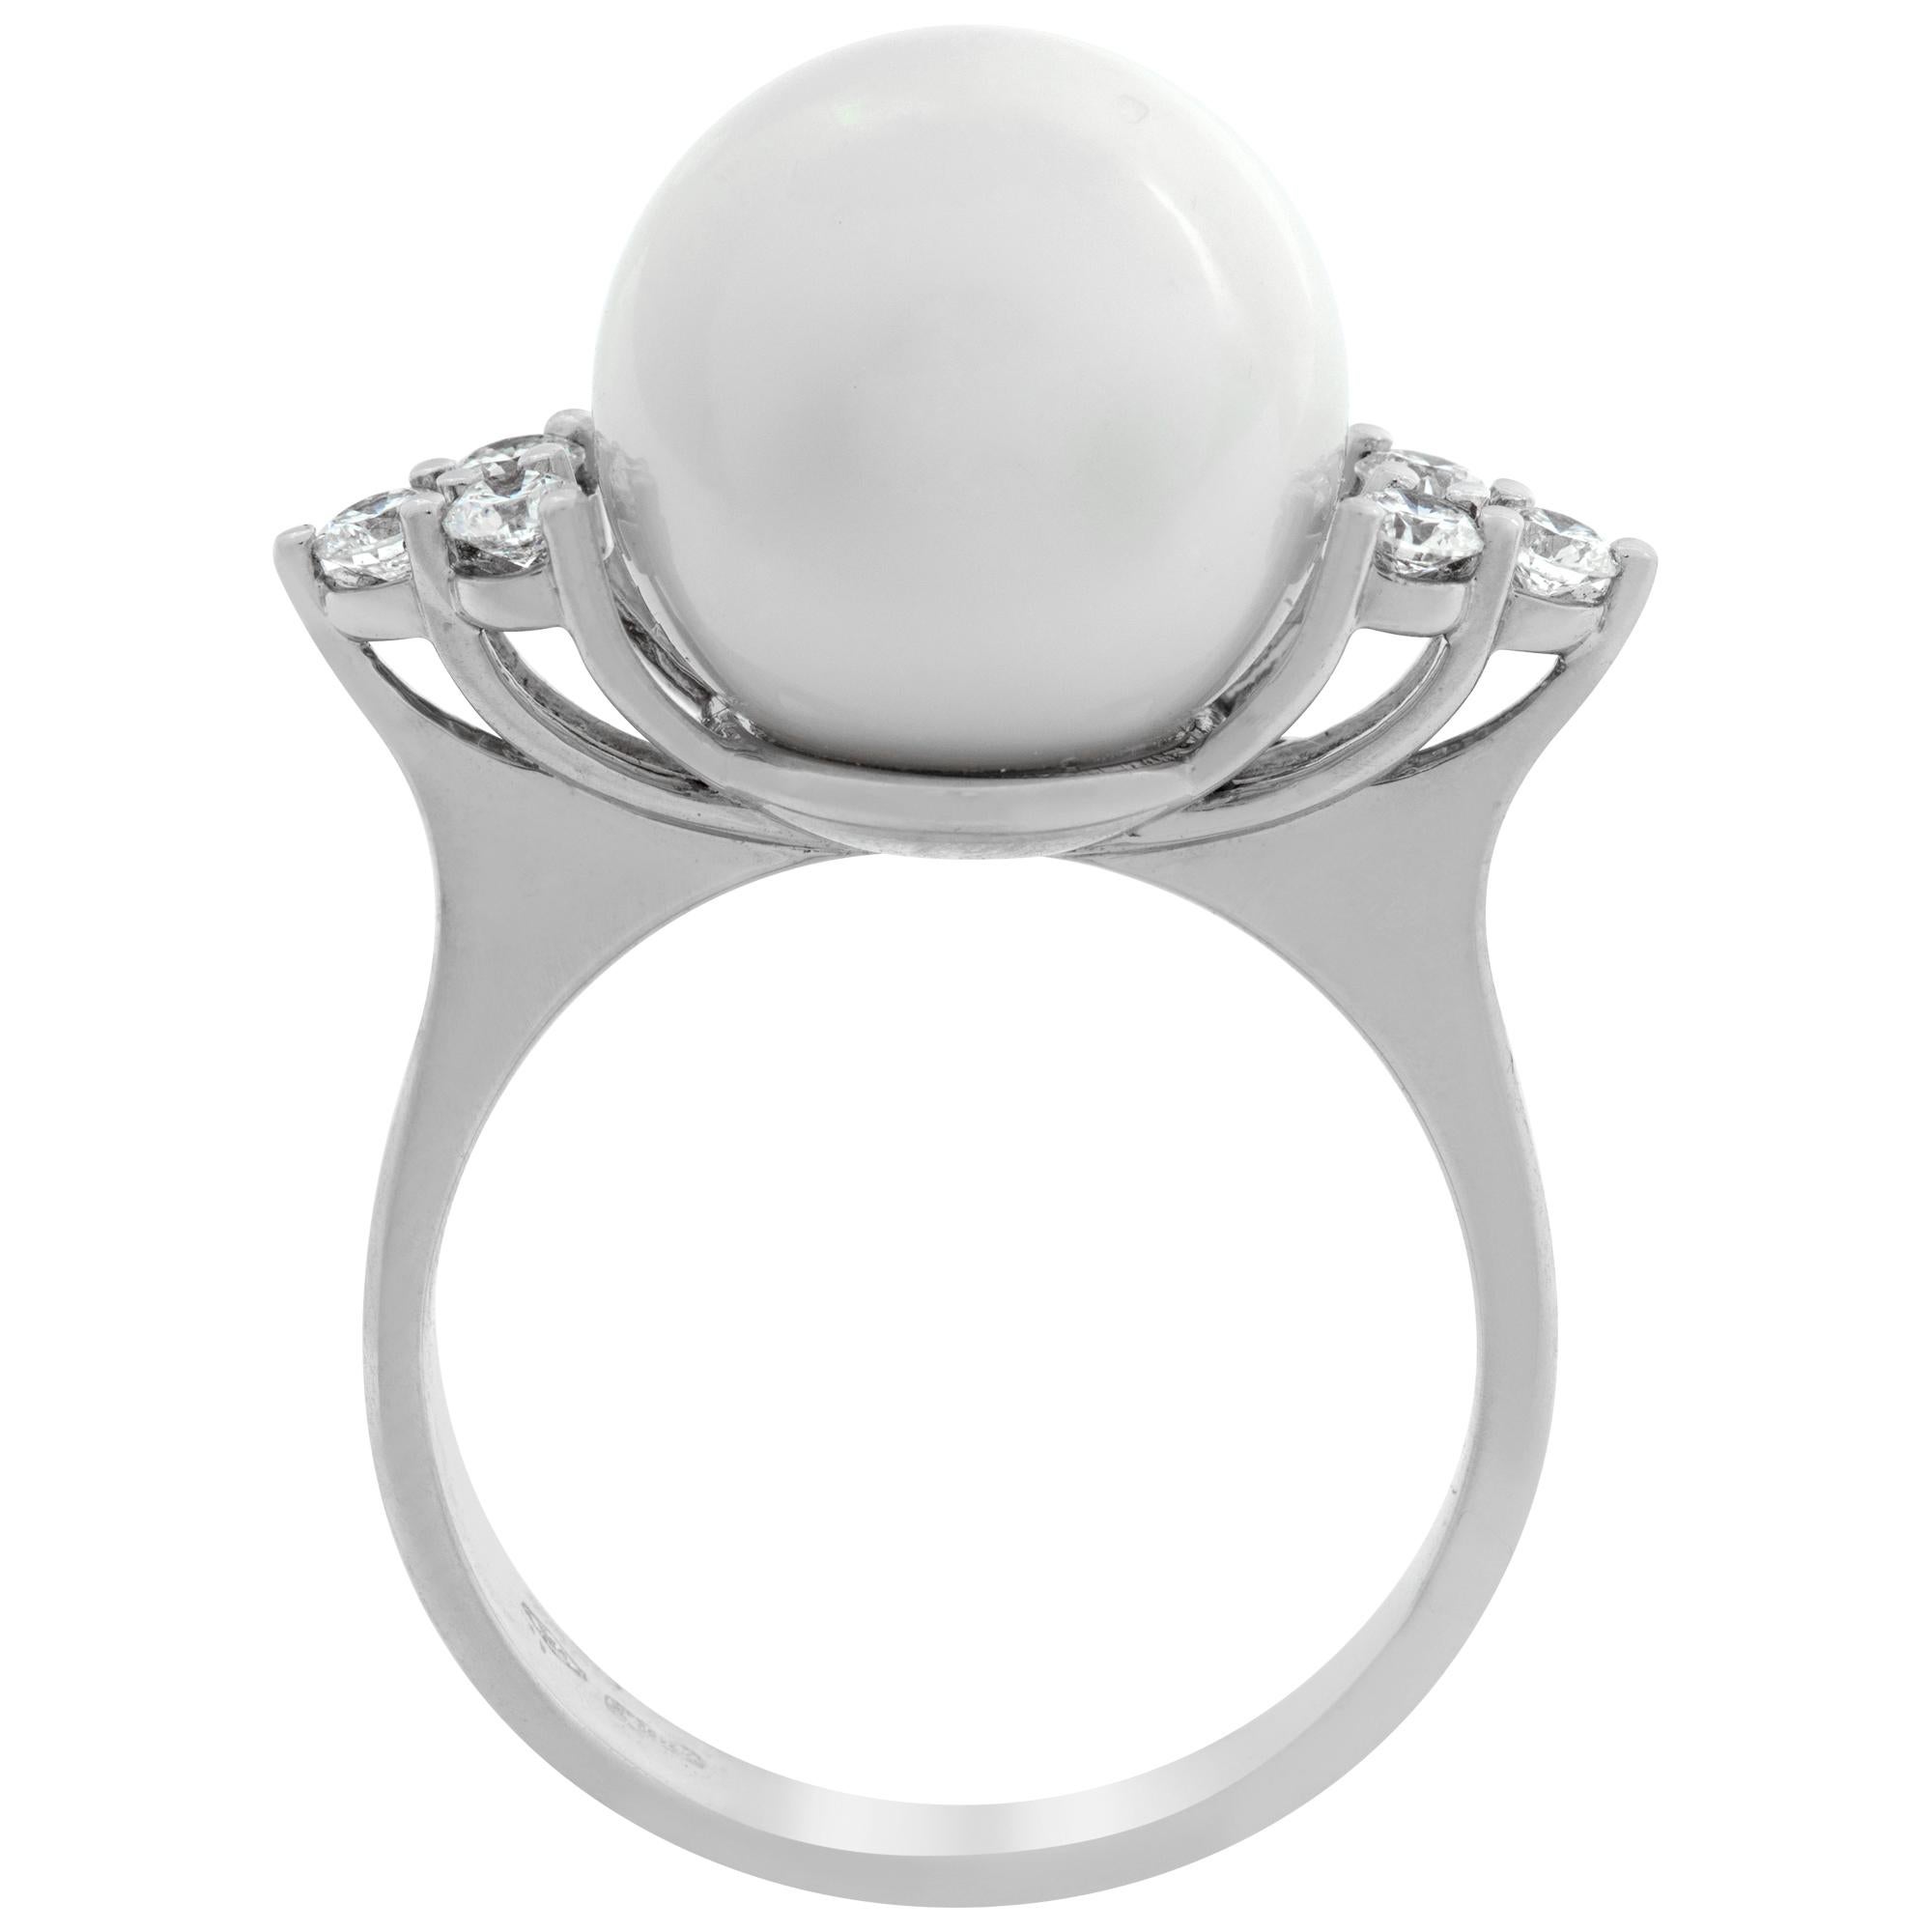 White gold South sea pearl & diamonds ring with round brilliant cut diamonds In Excellent Condition For Sale In Surfside, FL